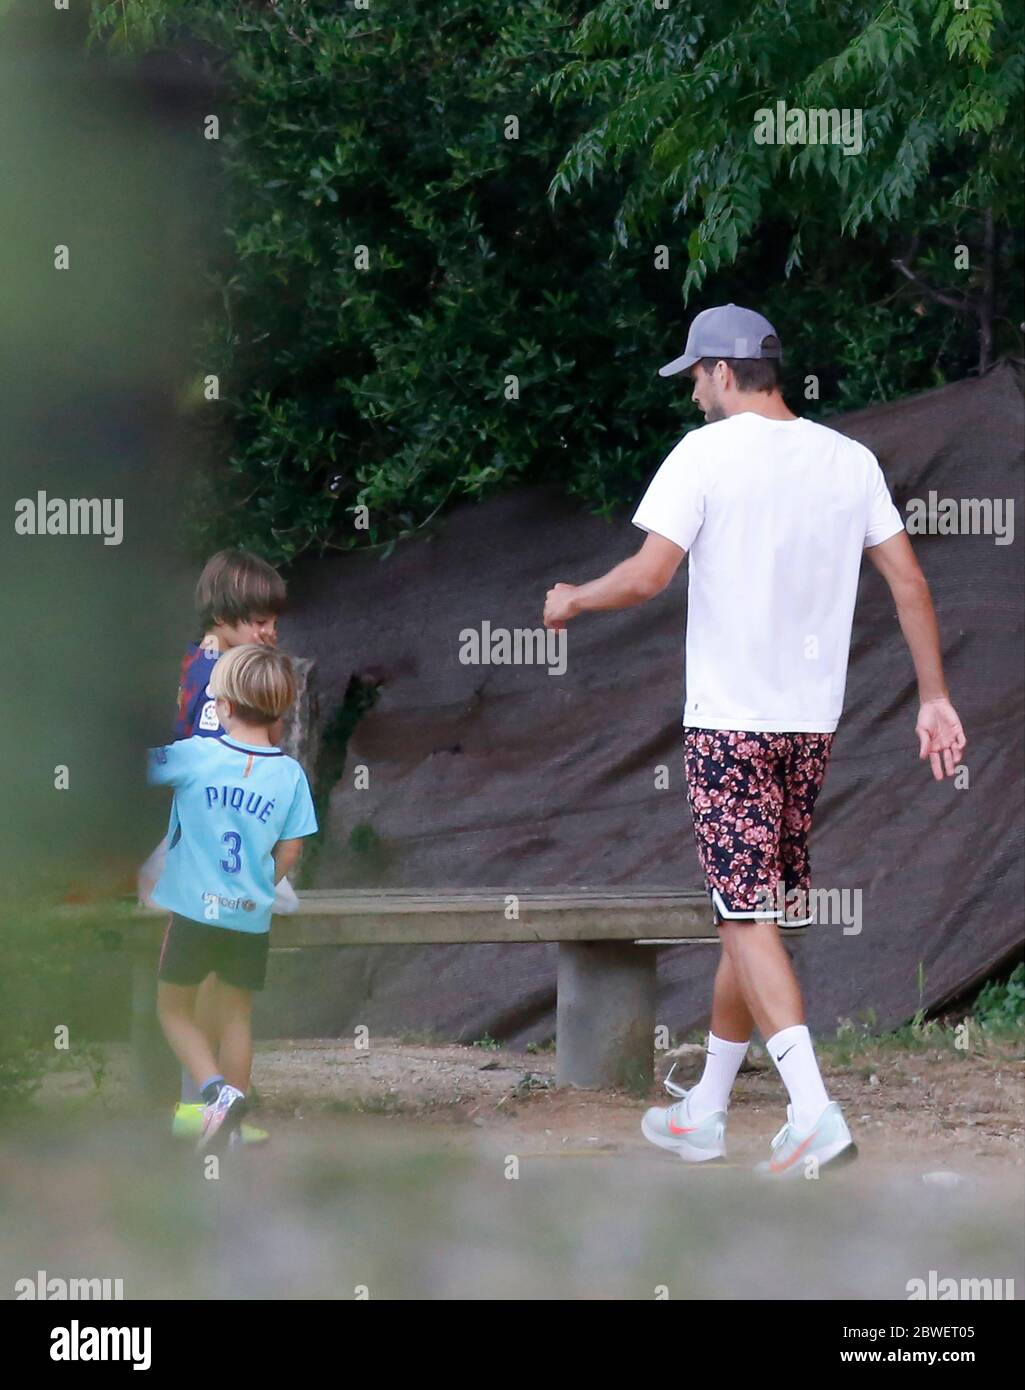 Gerard Pique, FC Barcelona player and husband of Shakira, is seen while  conducting a soccer training session for his sons Sasha Pique and Milan  Pique in a park in the city of